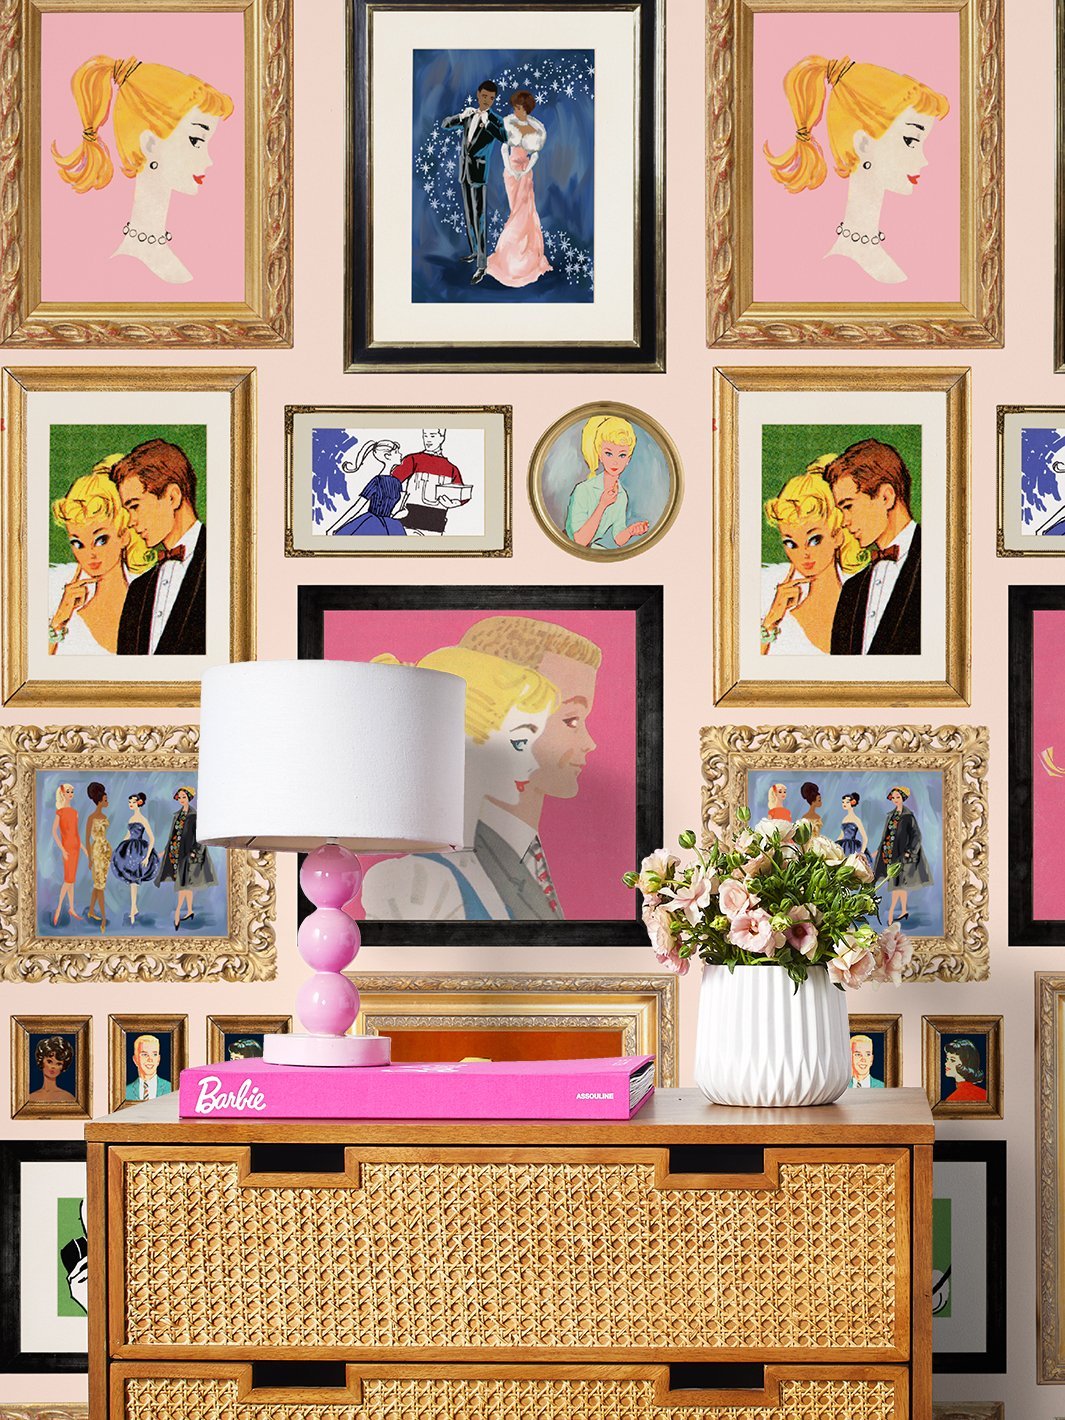 'Gallery Walls Illustrated' Wallpaper by Barbie™ - Peach